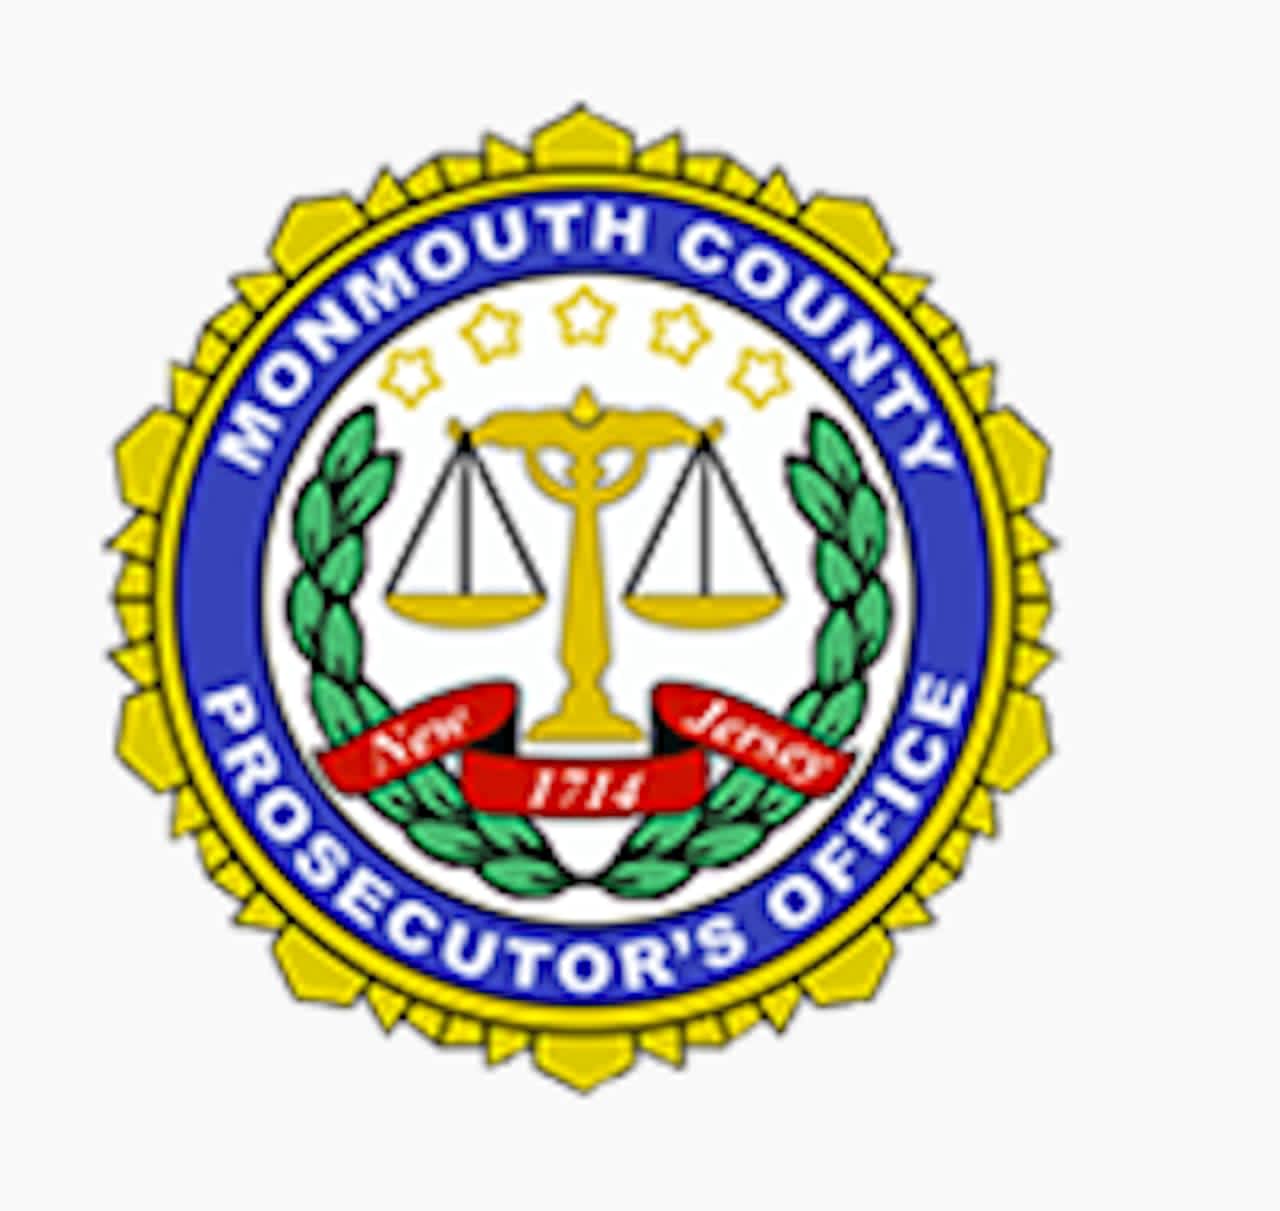 The Monmouth County Prosecutor's Office announced the arrest of three people on multiple drug charges.